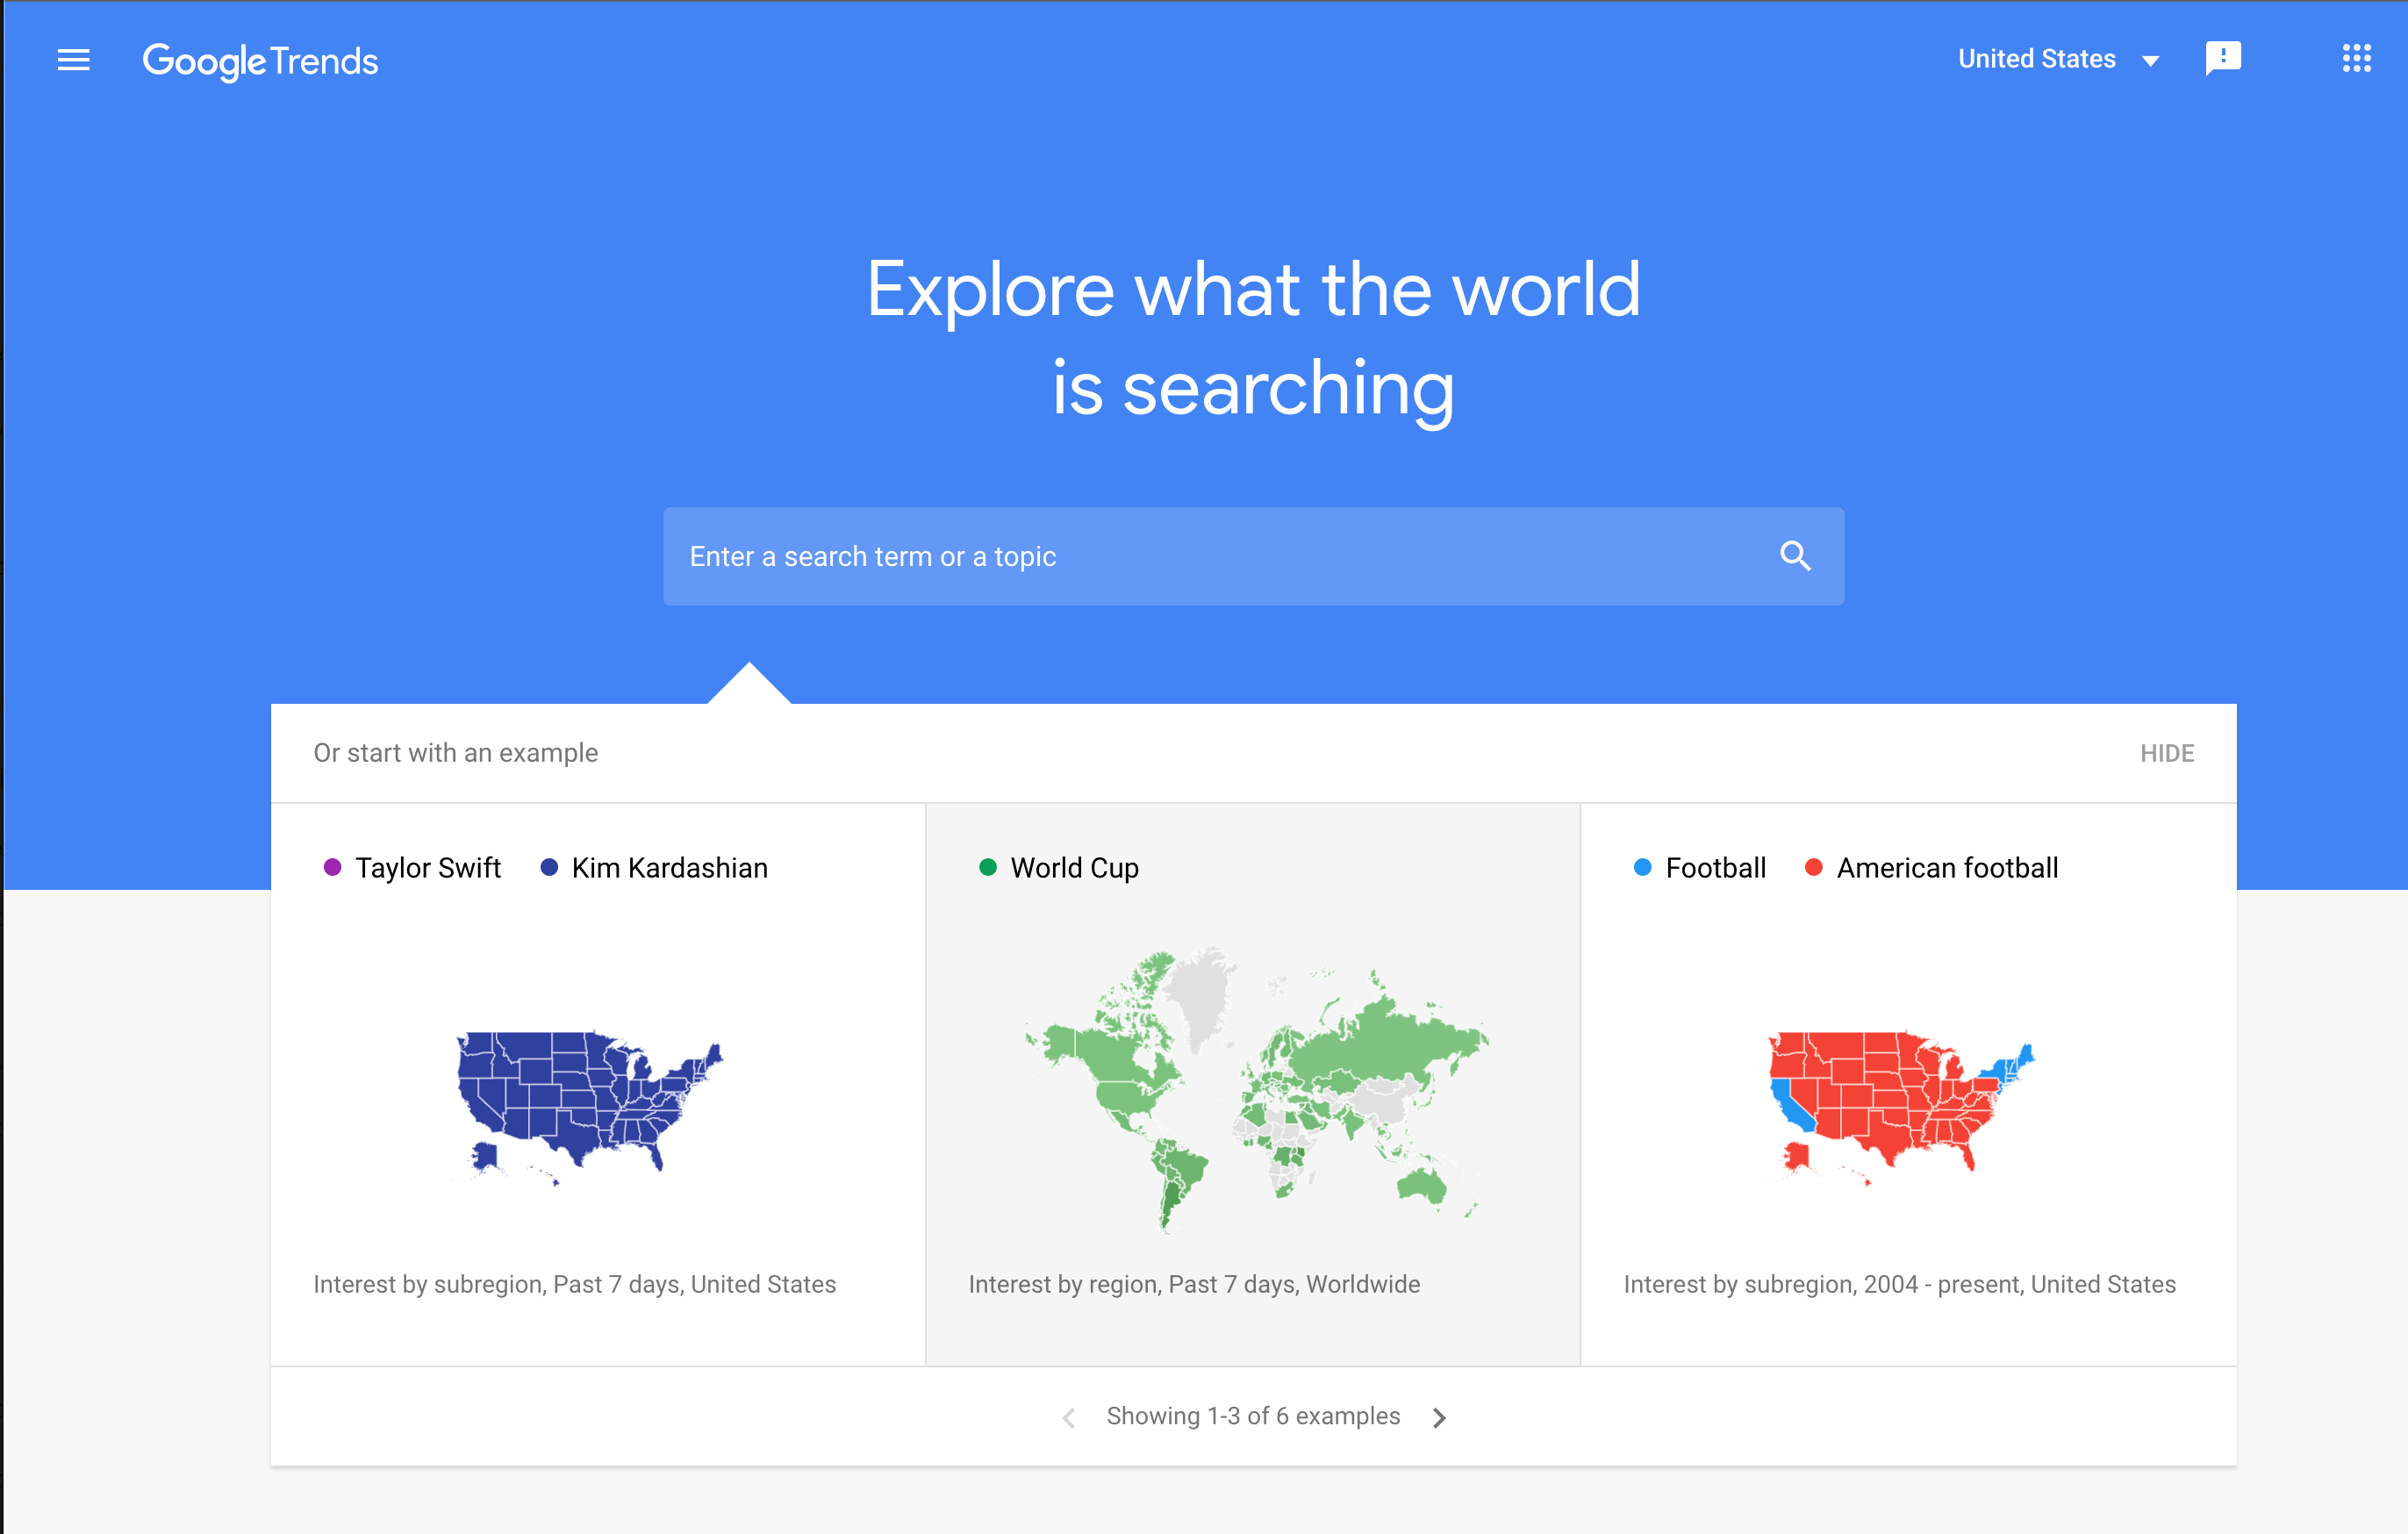 The Google Trends homepage